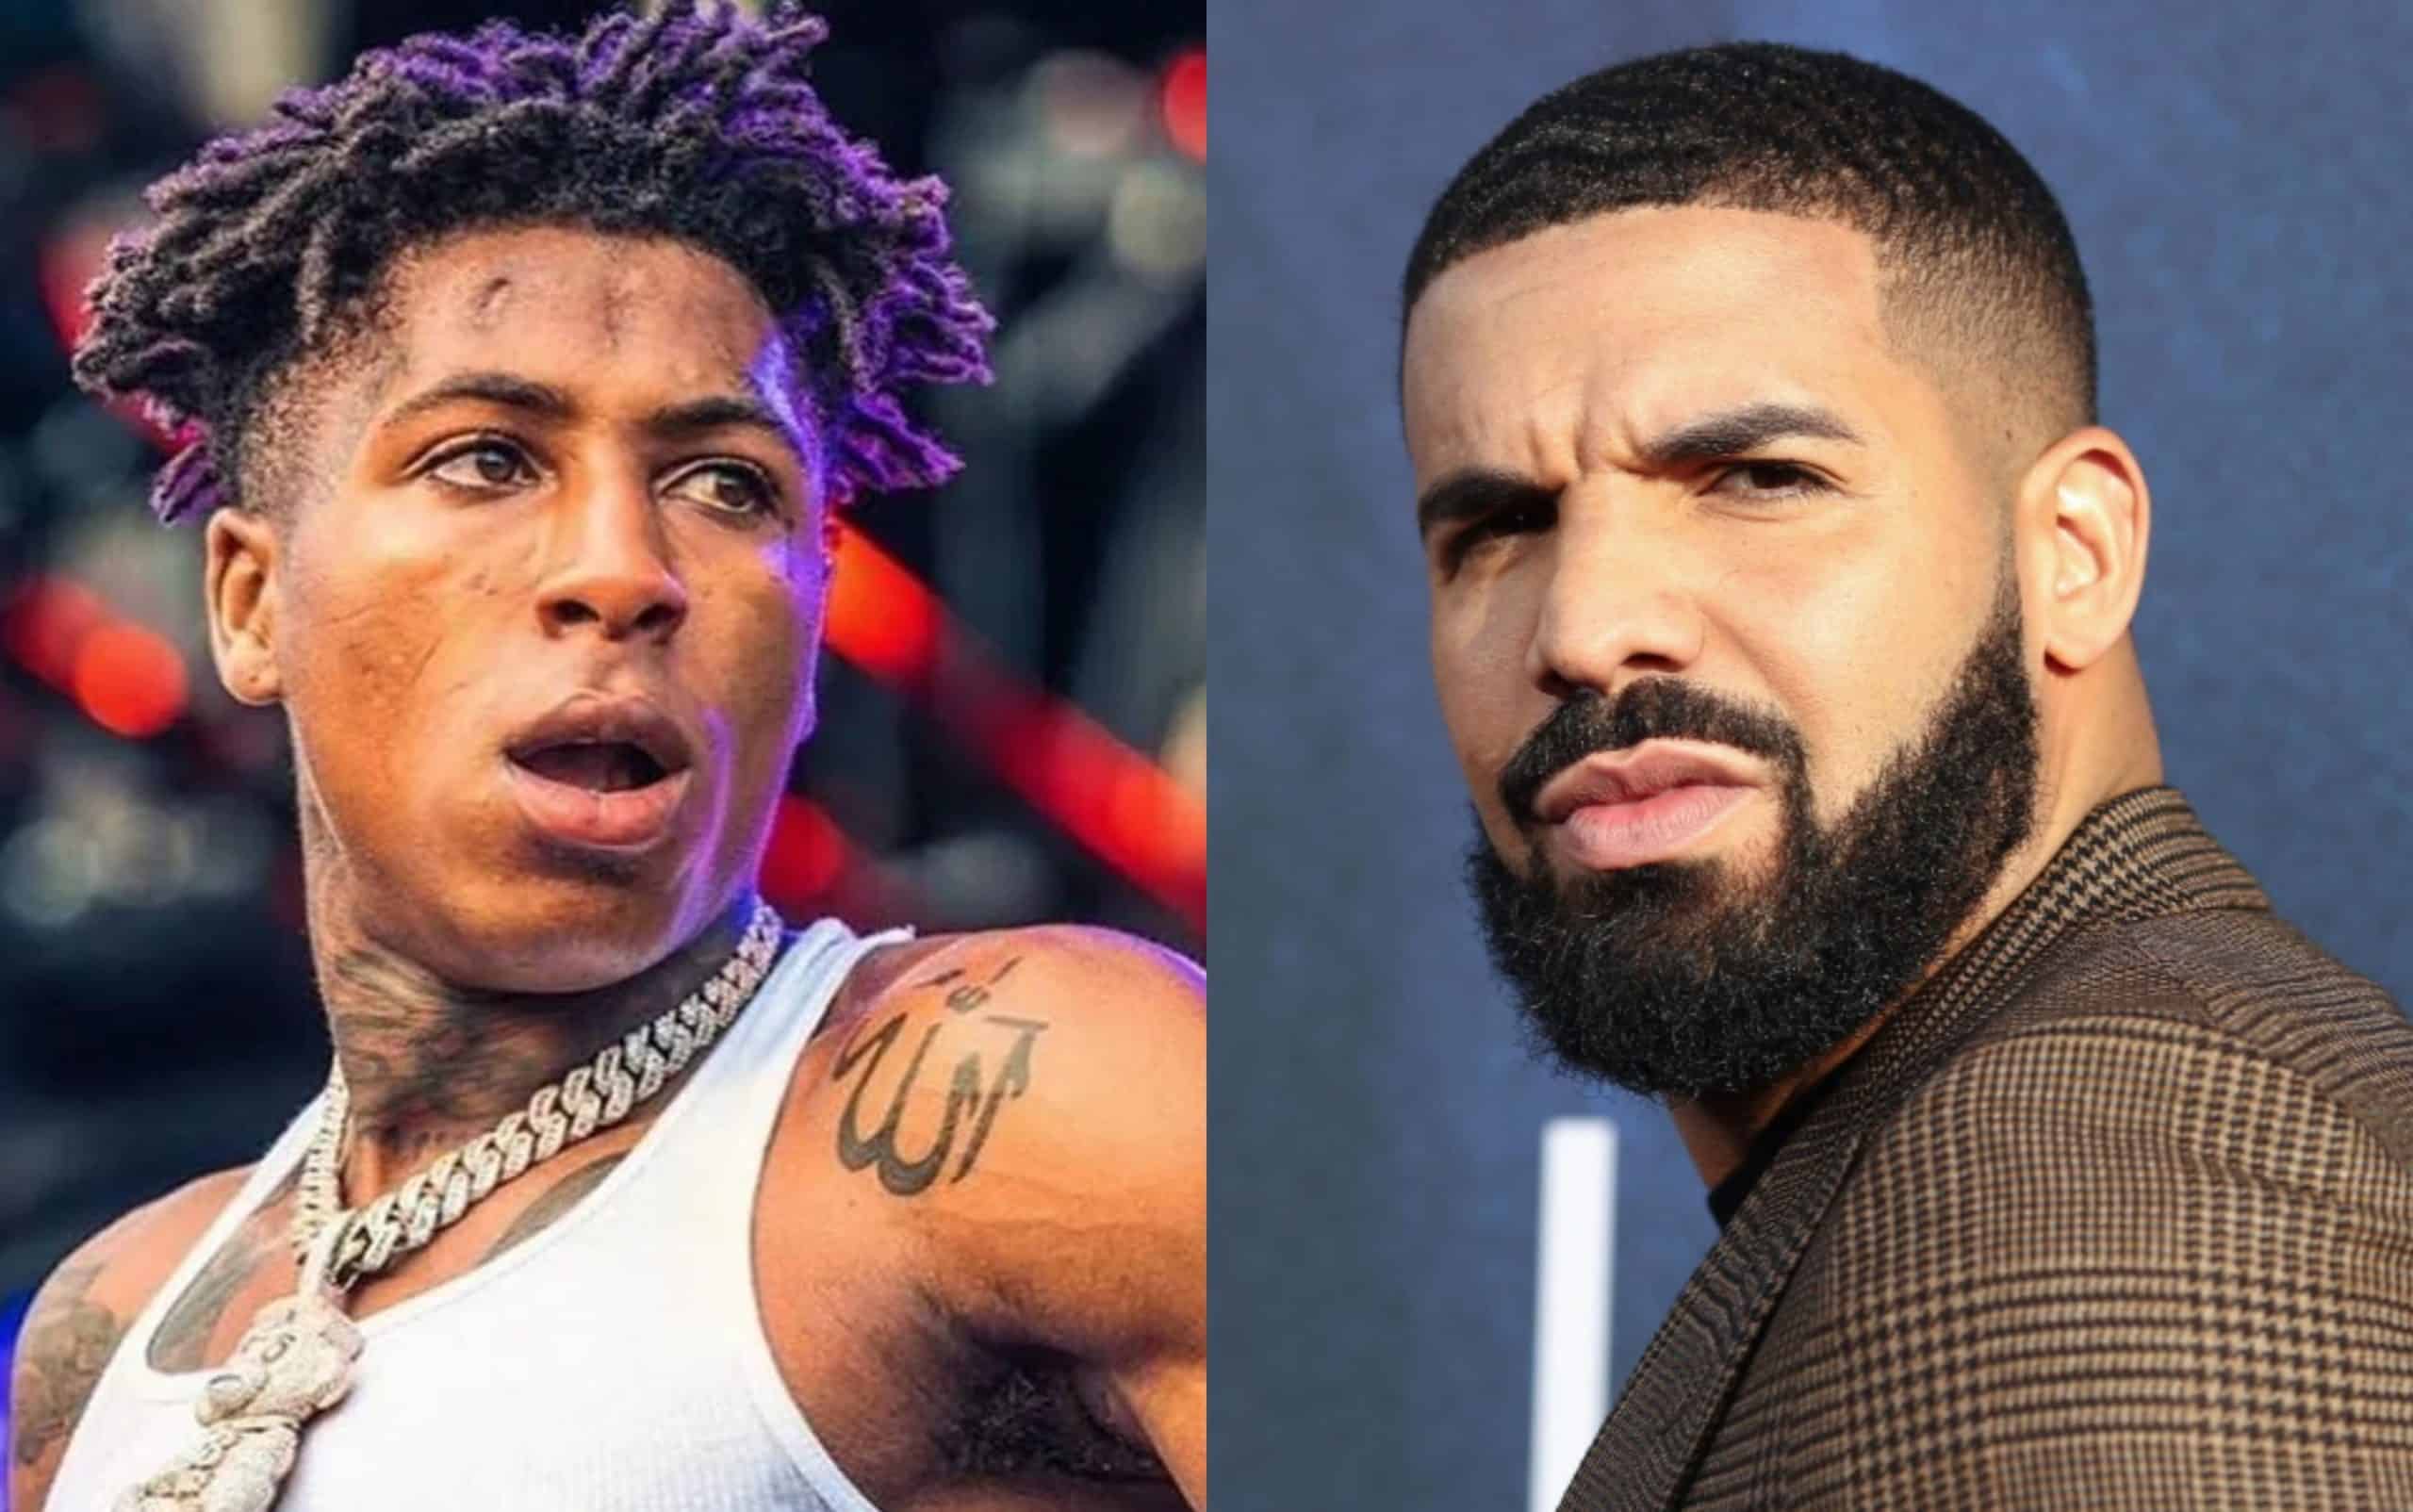 Drake, NBA YoungBoy are the top streaming artists in 2022